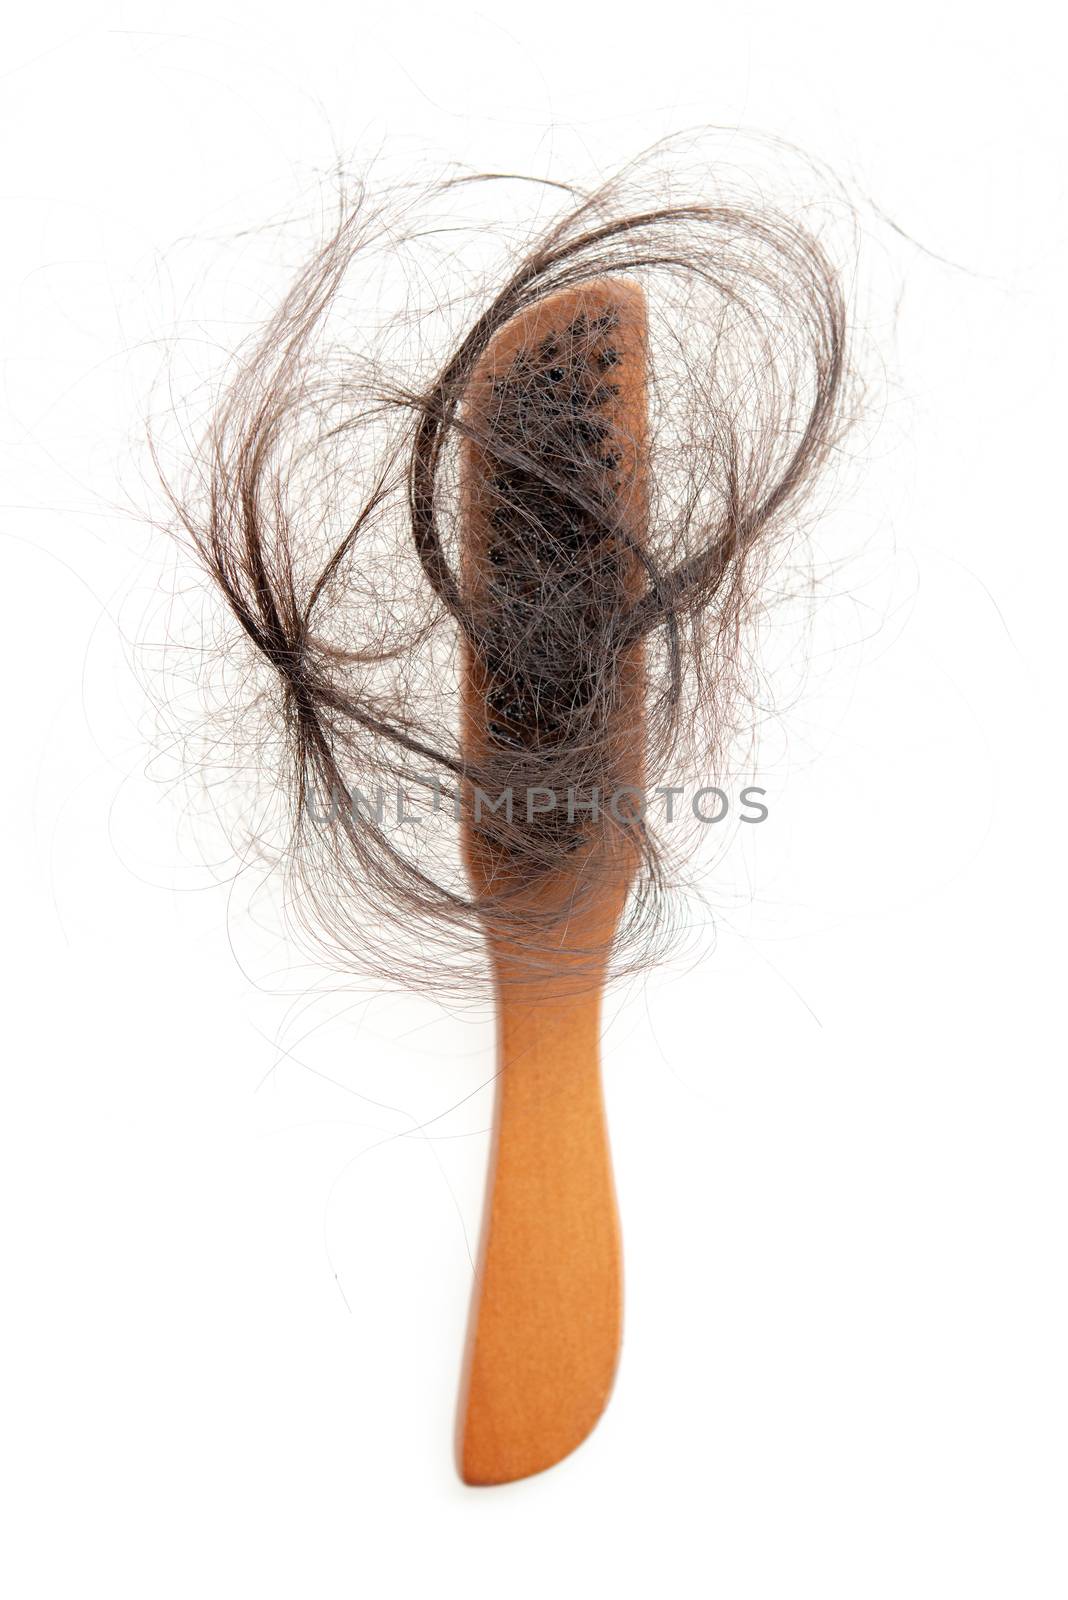 Hair fall and comb by szefei